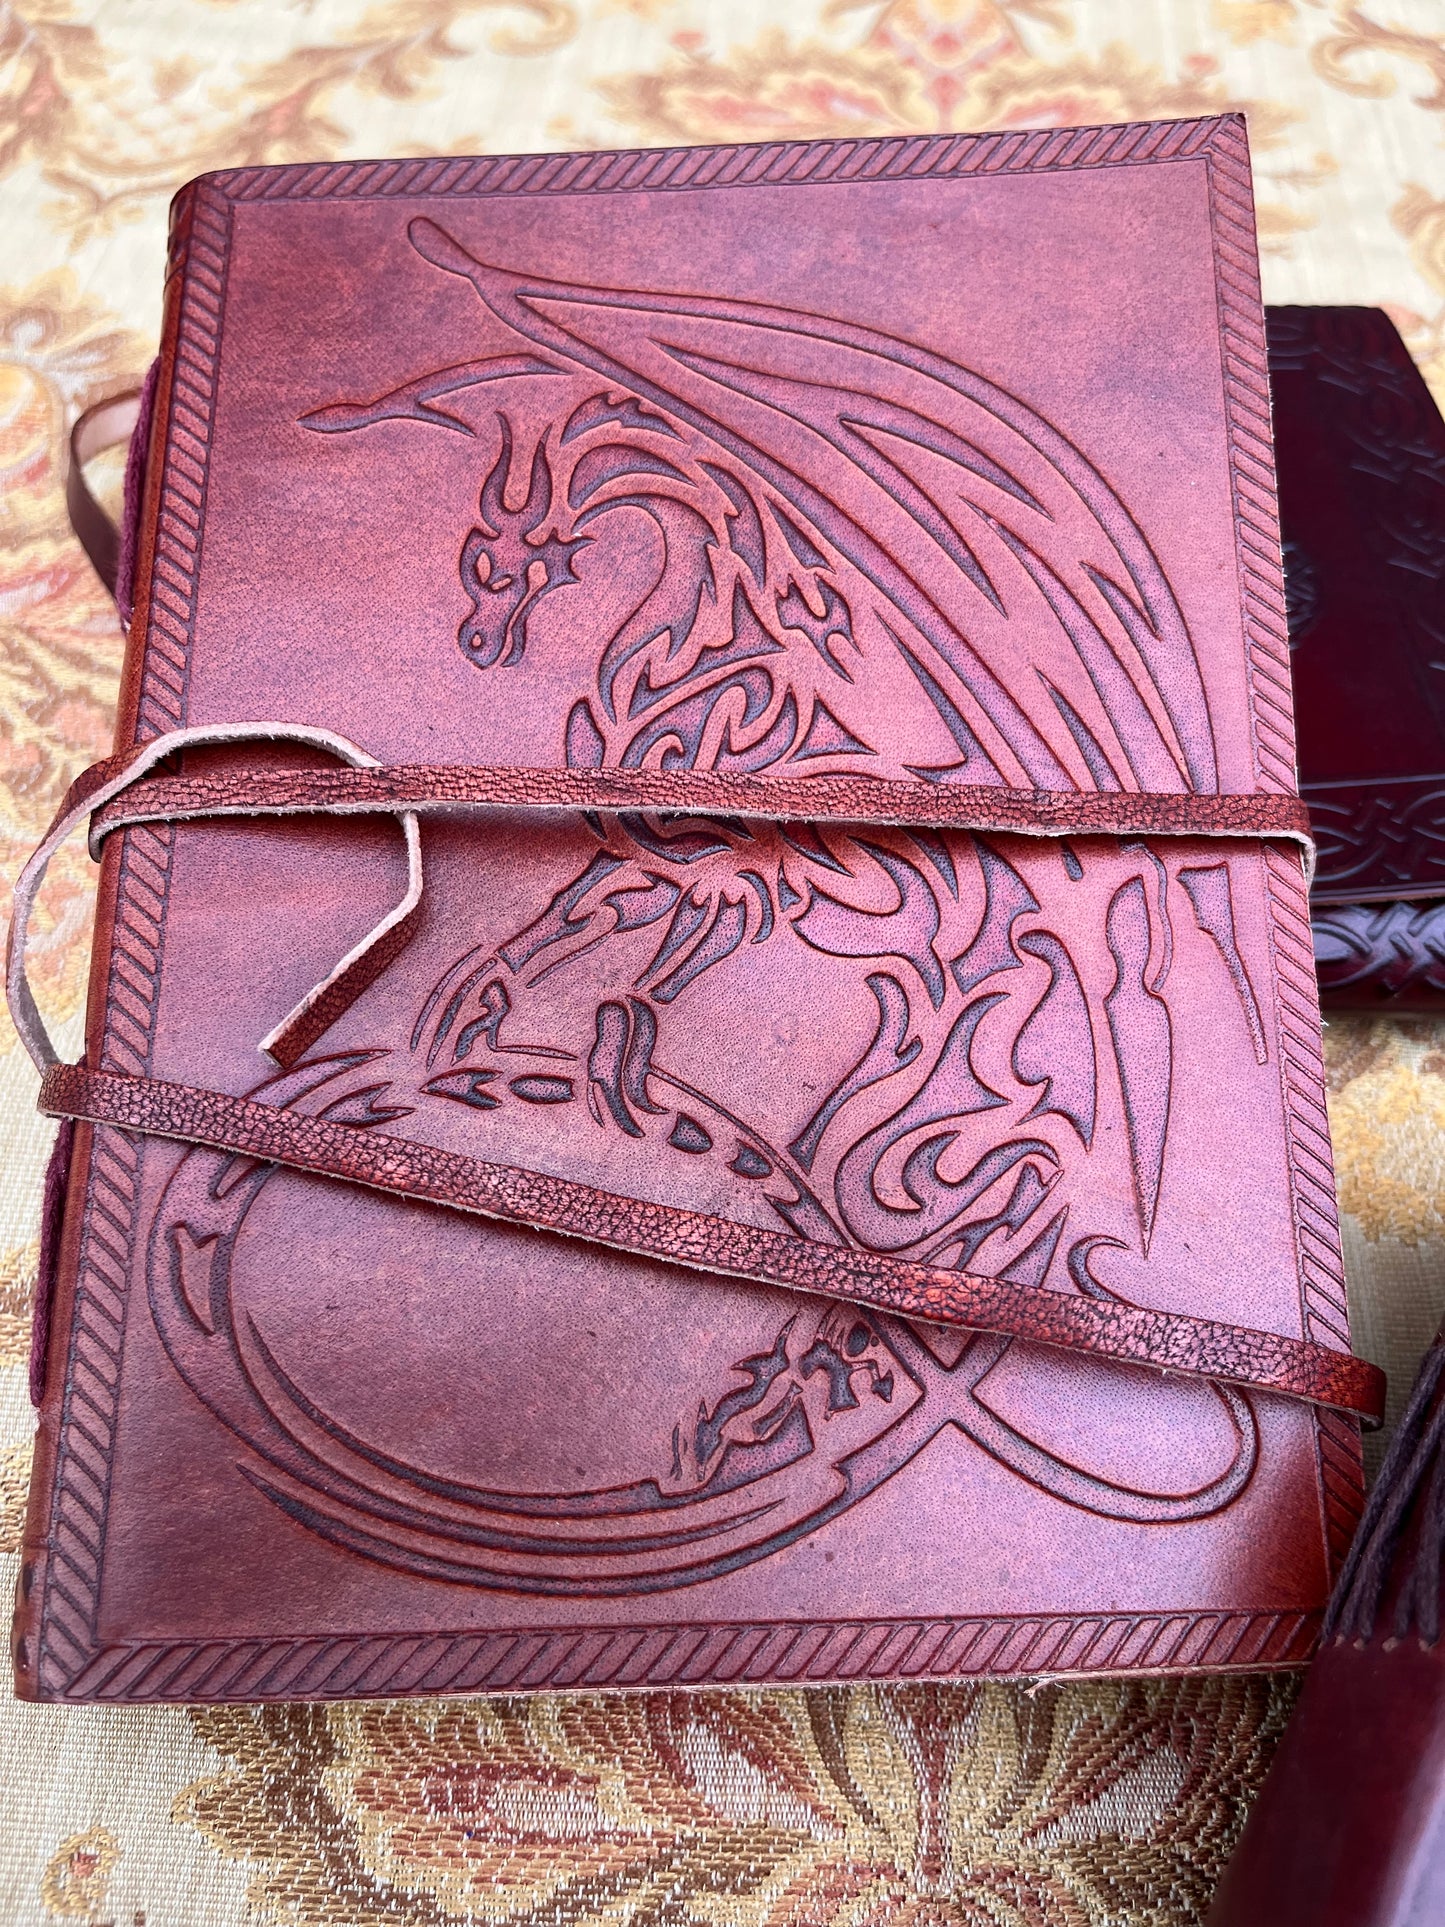 Bold Dragon Journal in Dark Red Leather